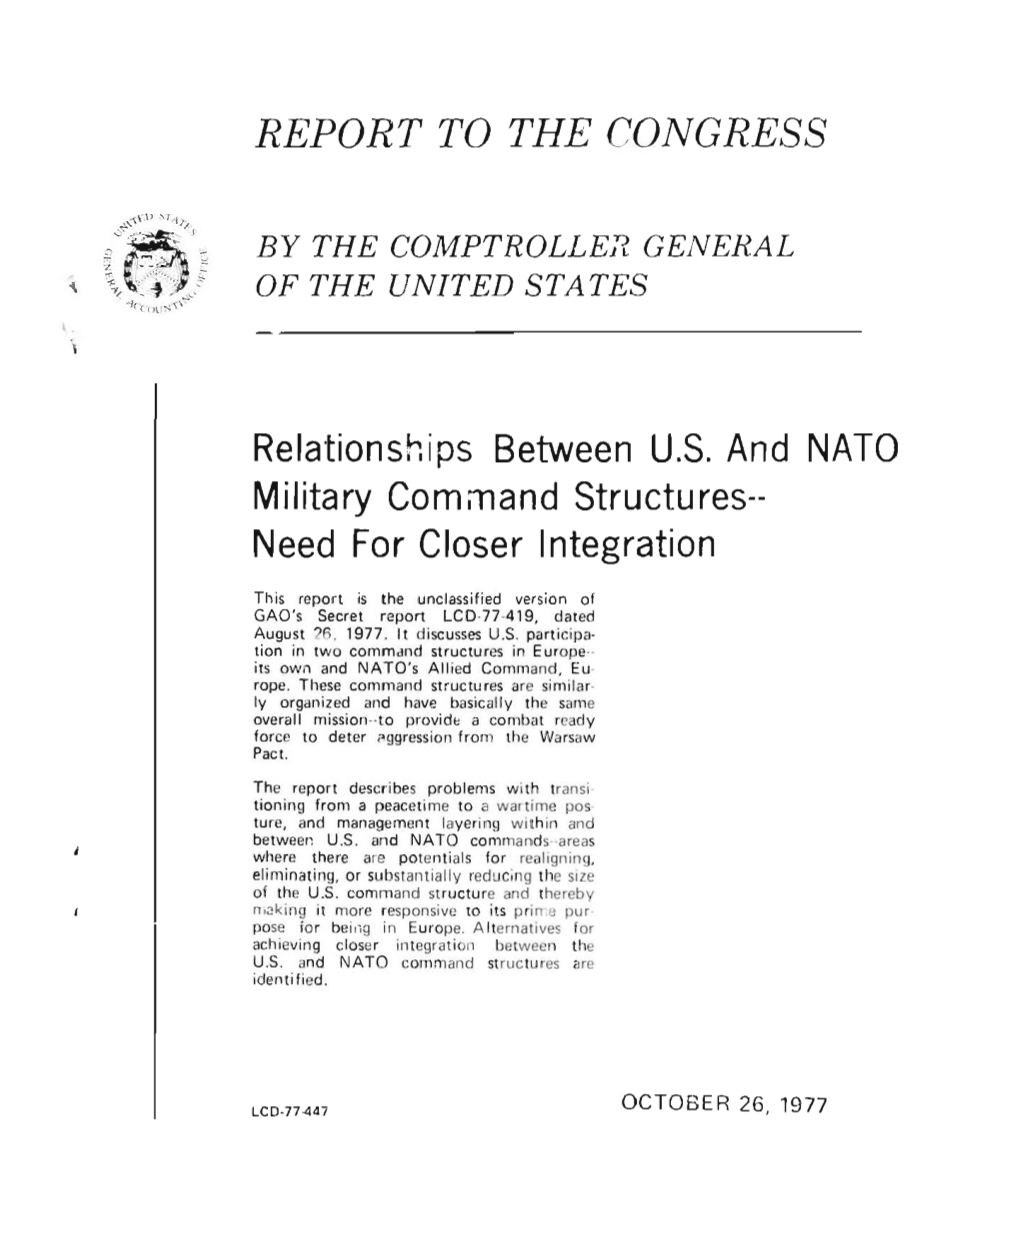 LCD-77-447 Relationships Between US and NATO Military